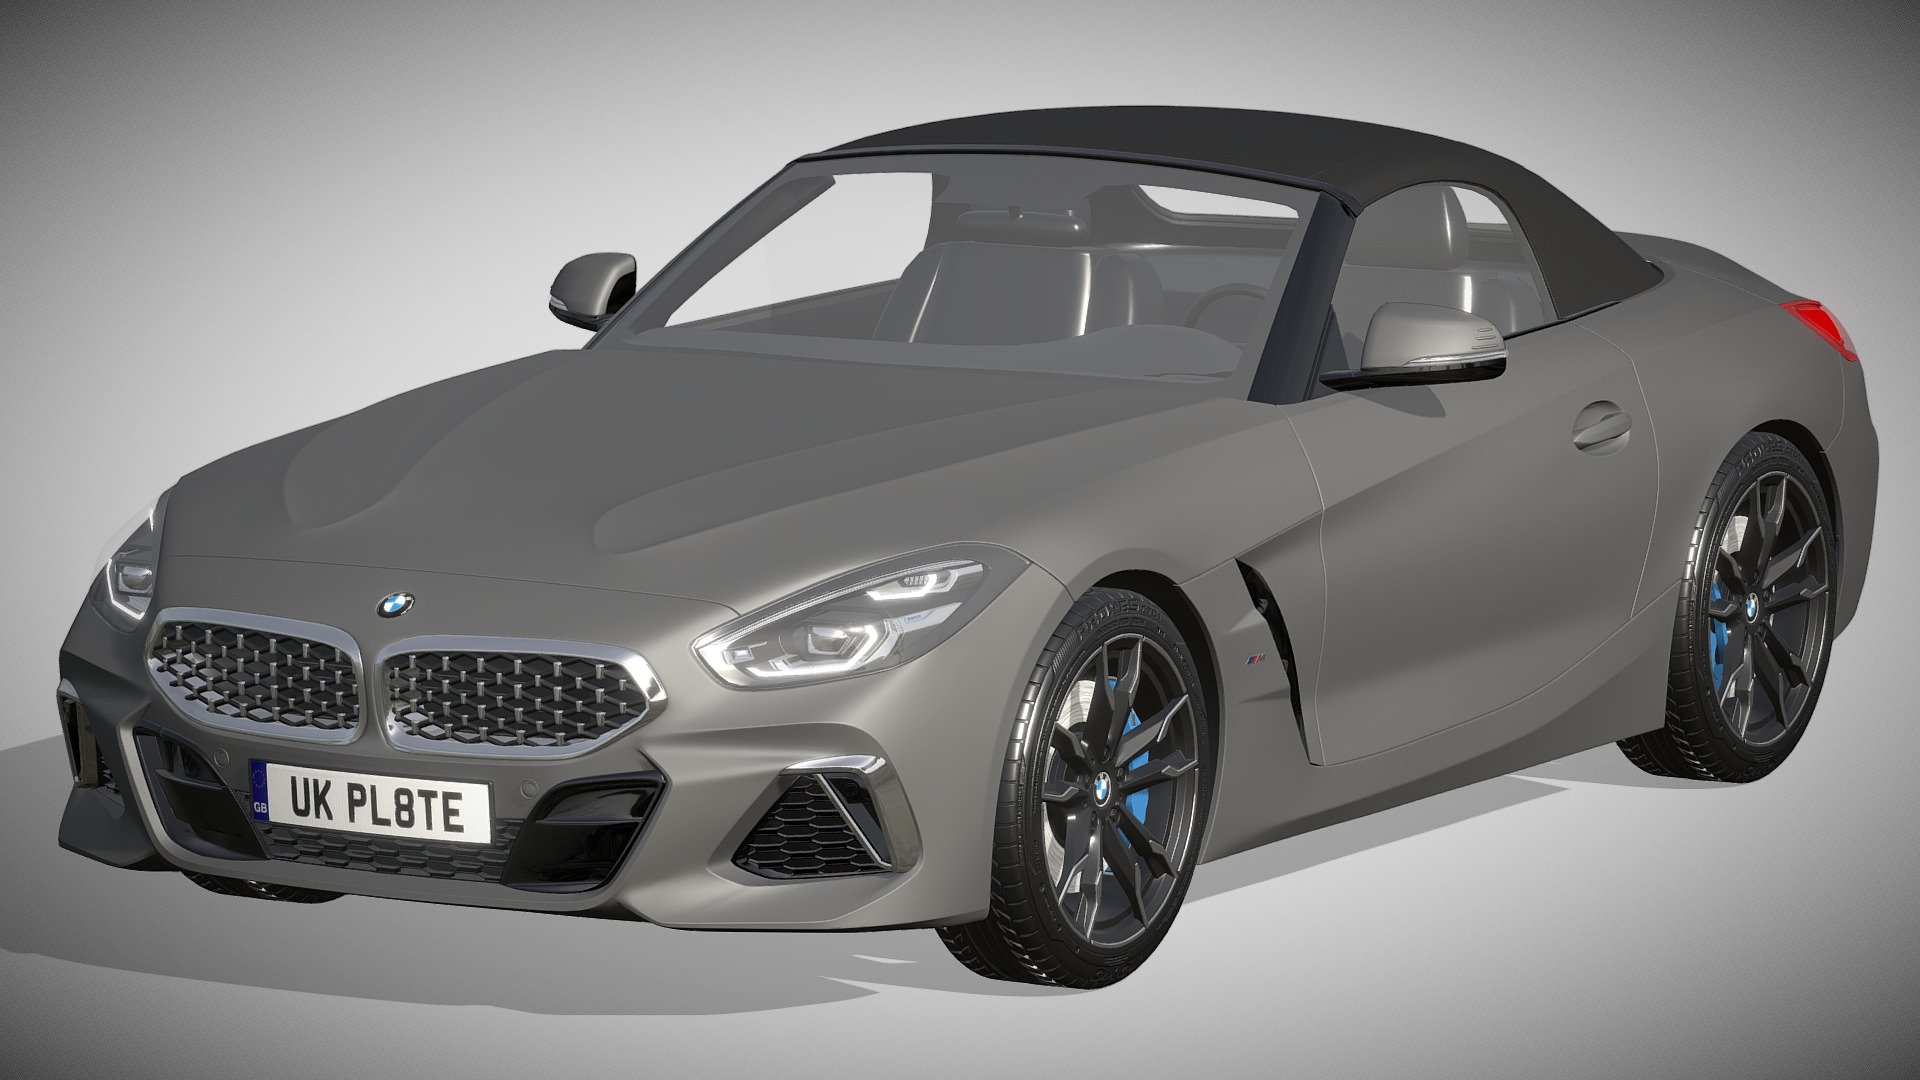 BMW Z4 M40i

https://www.bmw.de/de/neufahrzeuge/m/bmw-z4-m40i/2021/bmw-z4-ueberblick.html

Clean geometry Light weight model, yet completely detailed for HI-Res renders. Use for movies, Advertisements or games

Corona render and materials

All textures include in *.rar files

Lighting setup is not included in the file! - BMW Z4 M40i - Buy Royalty Free 3D model by zifir3d 3d model